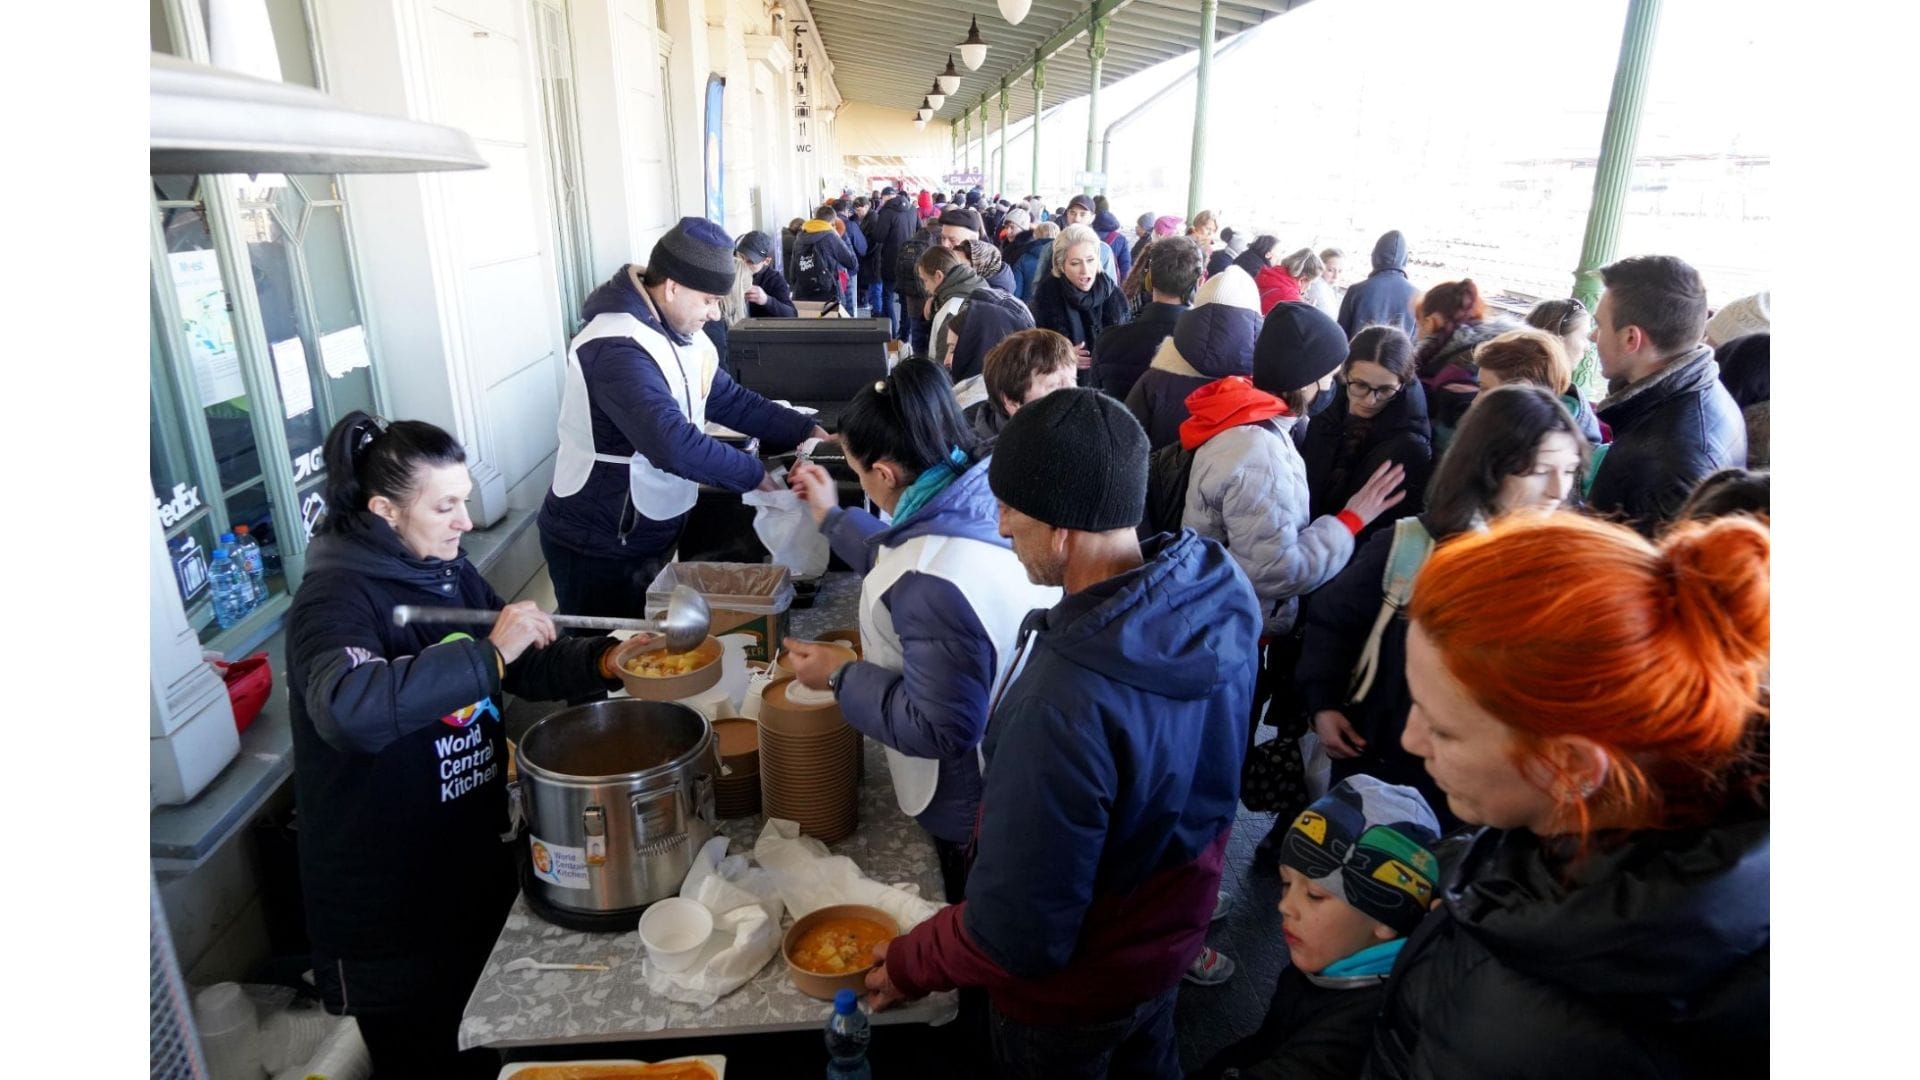 Food being provided at a train station in Poland.